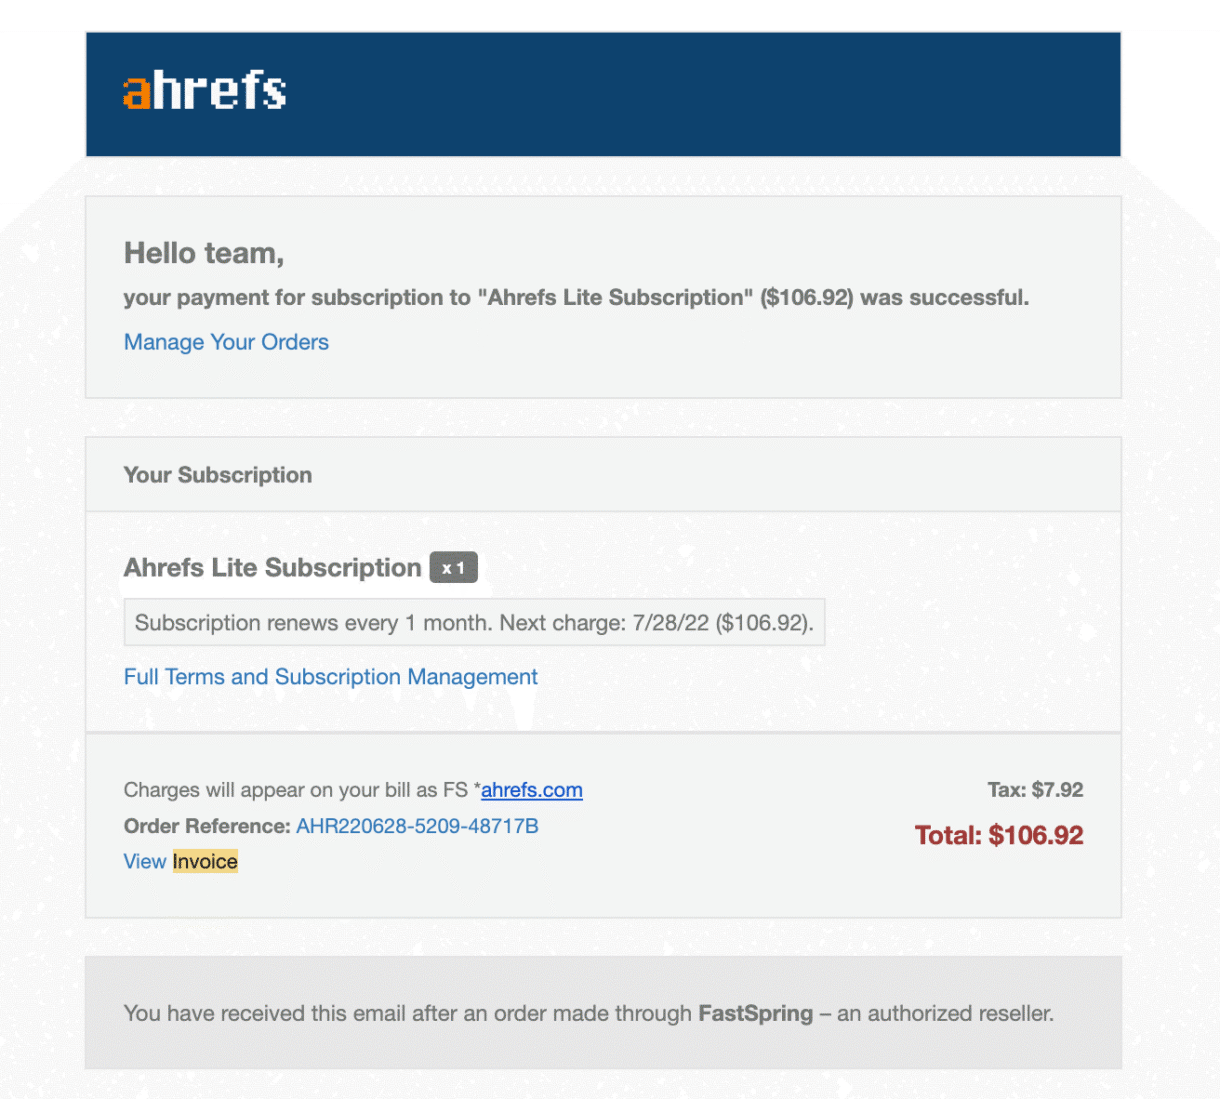 An example of transactional email directly tied to a payment (invoice + downloadable receipt)